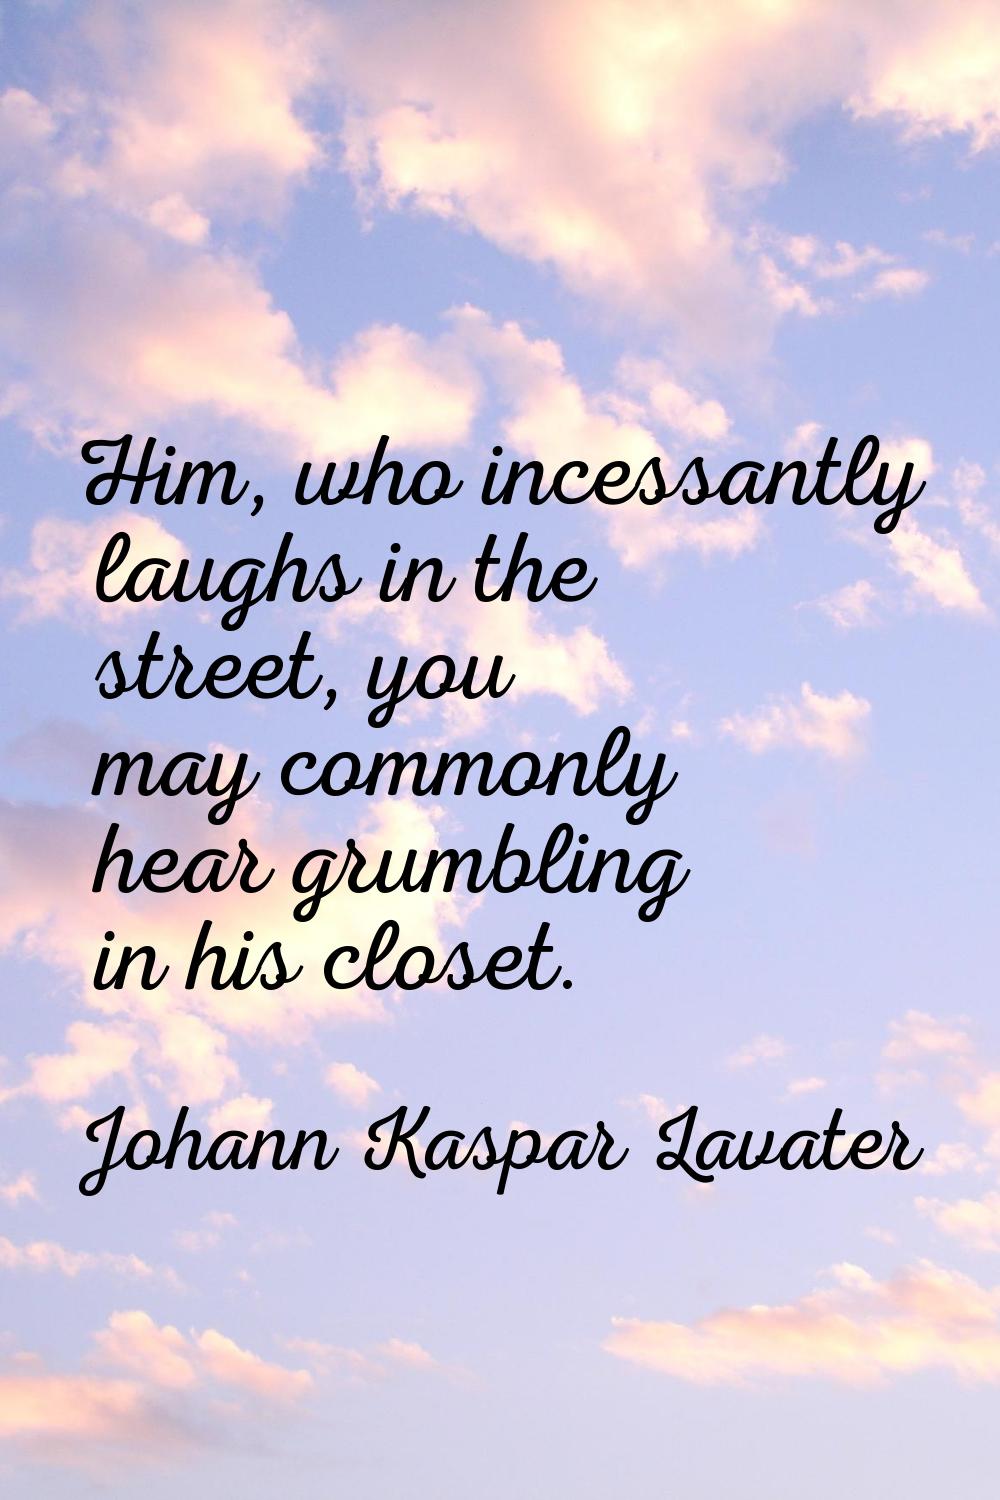 Him, who incessantly laughs in the street, you may commonly hear grumbling in his closet.